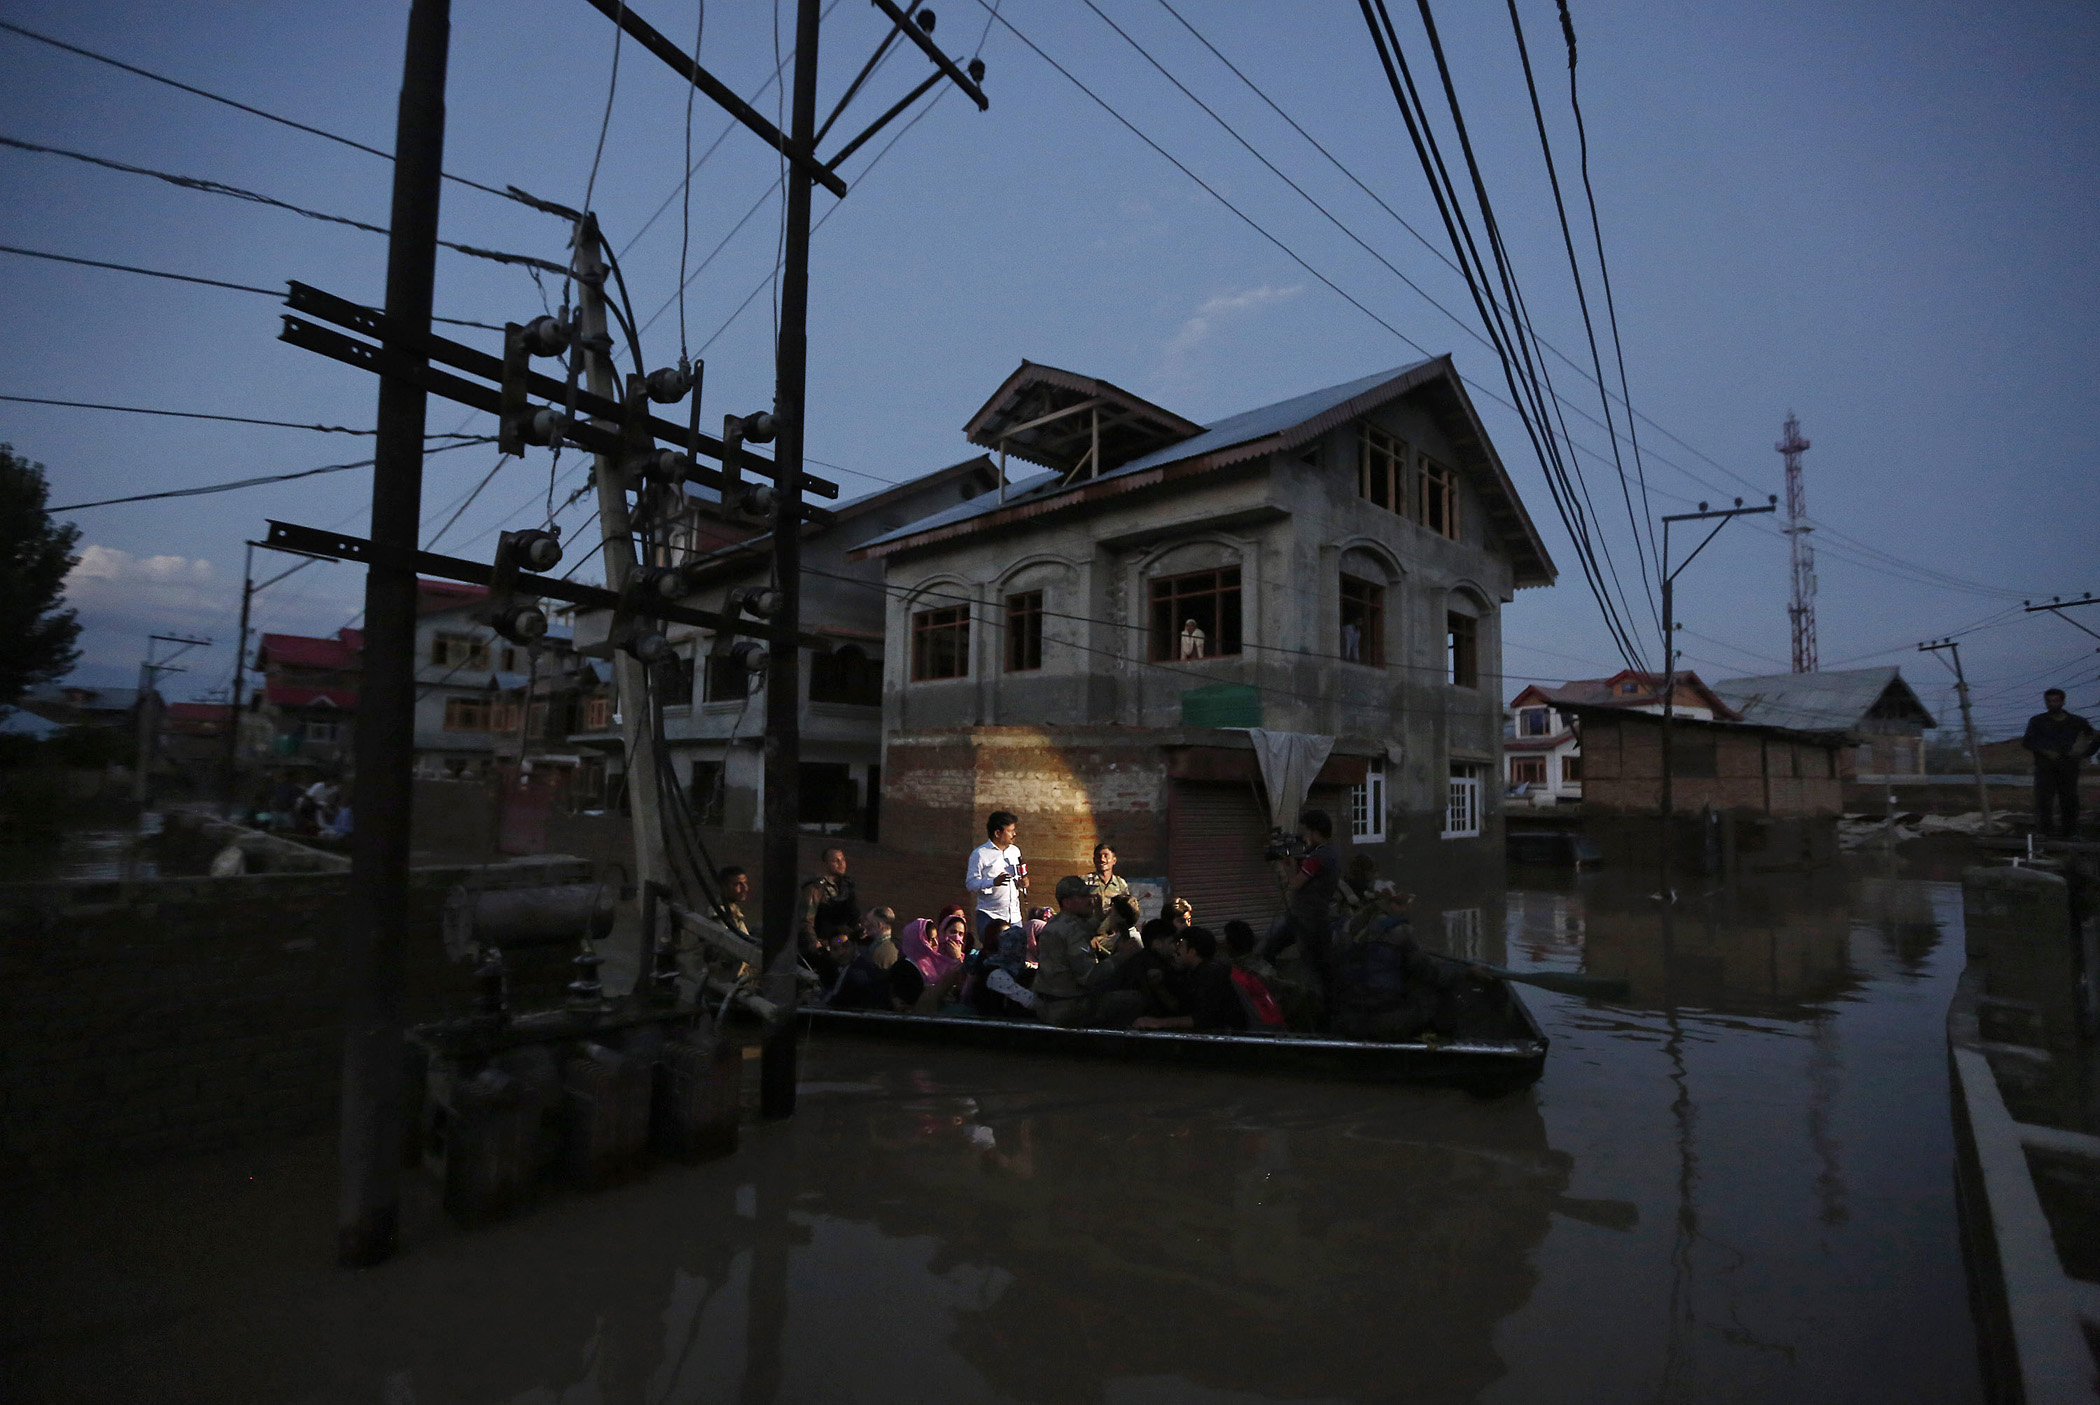 Flood victims are evacuated by boat from their flooded house in Srinagar, Sept. 10, 2014.